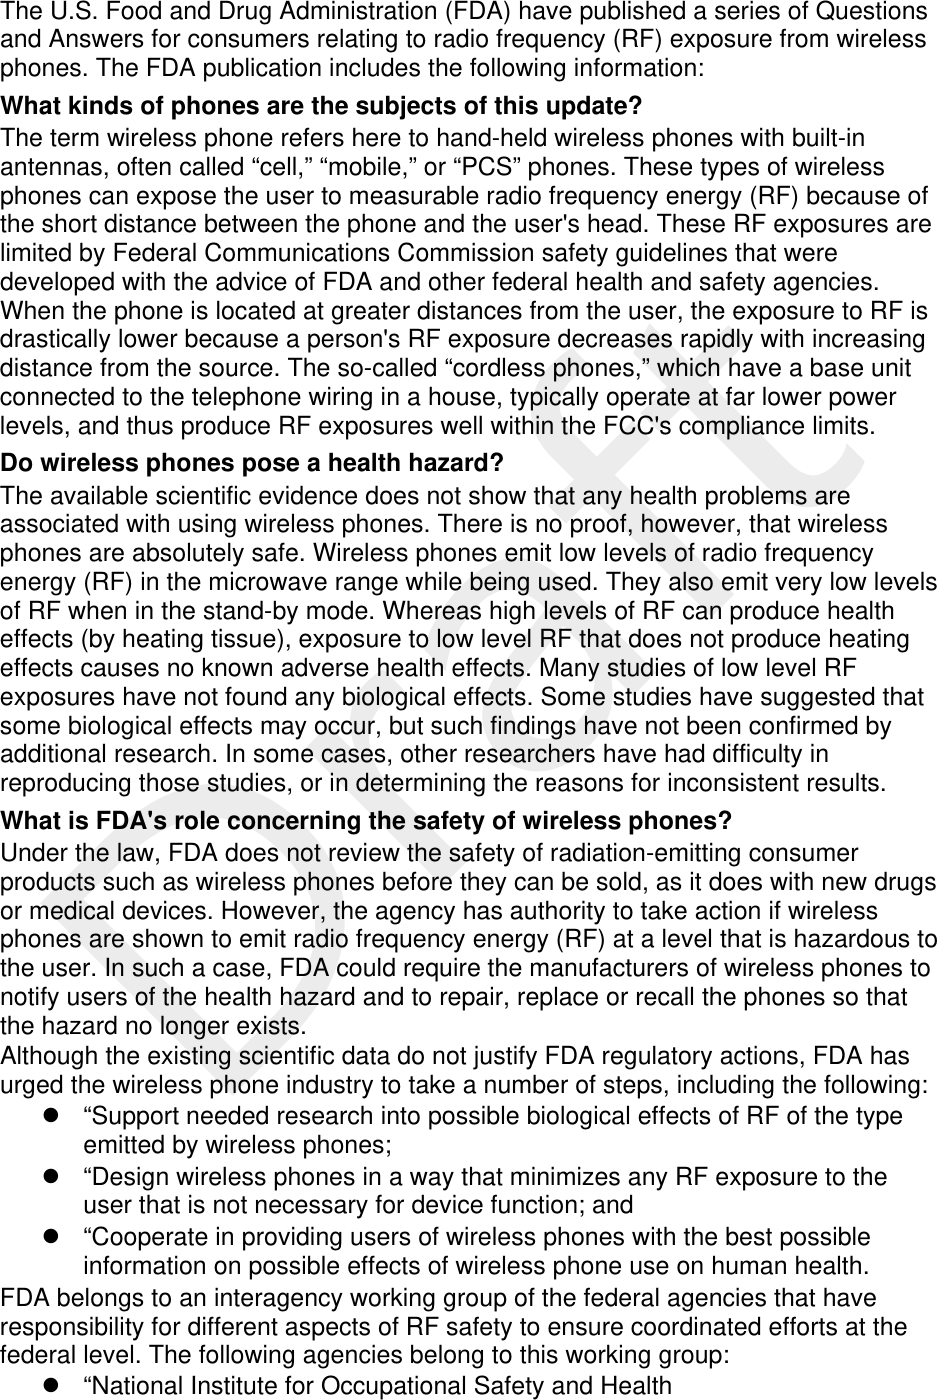  The U.S. Food and Drug Administration (FDA) have published a series of Questions and Answers for consumers relating to radio frequency (RF) exposure from wireless phones. The FDA publication includes the following information: What kinds of phones are the subjects of this update? The term wireless phone refers here to hand-held wireless phones with built-in antennas, often called “cell,” “mobile,” or “PCS” phones. These types of wireless phones can expose the user to measurable radio frequency energy (RF) because of the short distance between the phone and the user&apos;s head. These RF exposures are limited by Federal Communications Commission safety guidelines that were developed with the advice of FDA and other federal health and safety agencies. When the phone is located at greater distances from the user, the exposure to RF is drastically lower because a person&apos;s RF exposure decreases rapidly with increasing distance from the source. The so-called “cordless phones,” which have a base unit connected to the telephone wiring in a house, typically operate at far lower power levels, and thus produce RF exposures well within the FCC&apos;s compliance limits. Do wireless phones pose a health hazard? The available scientific evidence does not show that any health problems are associated with using wireless phones. There is no proof, however, that wireless phones are absolutely safe. Wireless phones emit low levels of radio frequency energy (RF) in the microwave range while being used. They also emit very low levels of RF when in the stand-by mode. Whereas high levels of RF can produce health effects (by heating tissue), exposure to low level RF that does not produce heating effects causes no known adverse health effects. Many studies of low level RF exposures have not found any biological effects. Some studies have suggested that some biological effects may occur, but such findings have not been confirmed by additional research. In some cases, other researchers have had difficulty in reproducing those studies, or in determining the reasons for inconsistent results. What is FDA&apos;s role concerning the safety of wireless phones? Under the law, FDA does not review the safety of radiation-emitting consumer products such as wireless phones before they can be sold, as it does with new drugs or medical devices. However, the agency has authority to take action if wireless phones are shown to emit radio frequency energy (RF) at a level that is hazardous to the user. In such a case, FDA could require the manufacturers of wireless phones to notify users of the health hazard and to repair, replace or recall the phones so that the hazard no longer exists. Although the existing scientific data do not justify FDA regulatory actions, FDA has urged the wireless phone industry to take a number of steps, including the following:   “Support needed research into possible biological effects of RF of the type emitted by wireless phones;   “Design wireless phones in a way that minimizes any RF exposure to the user that is not necessary for device function; and   “Cooperate in providing users of wireless phones with the best possible information on possible effects of wireless phone use on human health. FDA belongs to an interagency working group of the federal agencies that have responsibility for different aspects of RF safety to ensure coordinated efforts at the federal level. The following agencies belong to this working group:   “National Institute for Occupational Safety and Health 